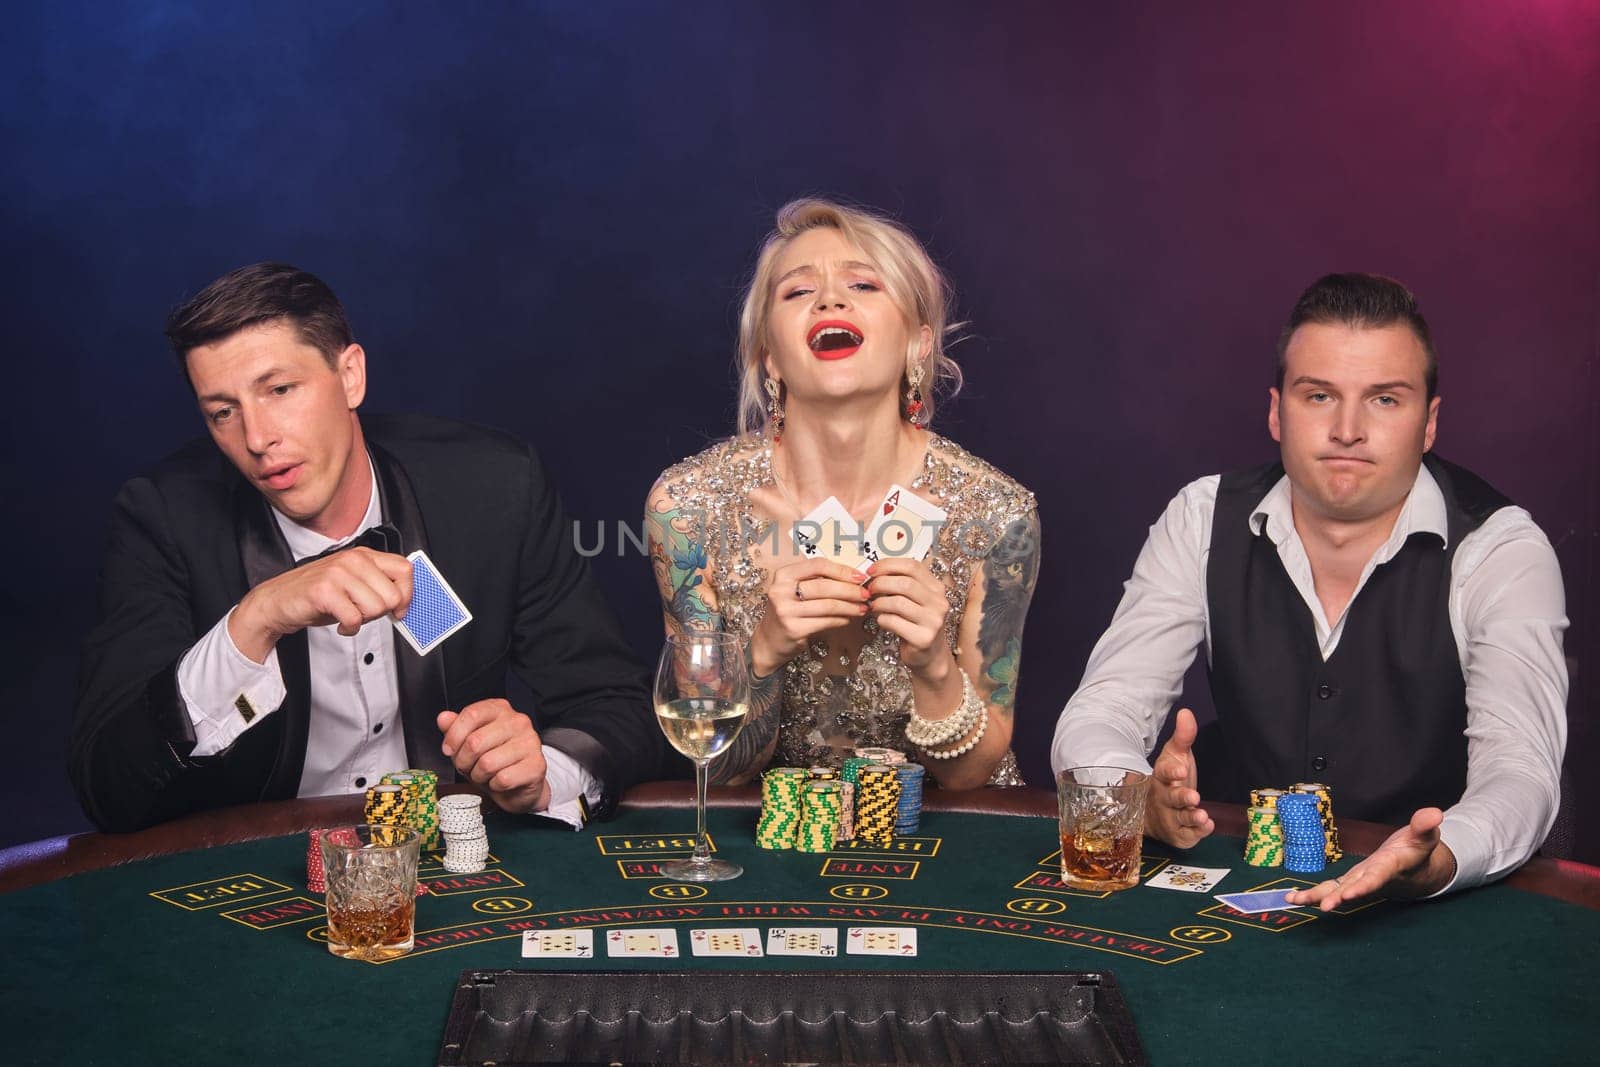 Two rich men and elegant woman are playing poker at casino. Youth are making bets waiting for a big win. They are looking upset sitting at the table against a red and blue backlights on black smoke background. Cards, chips, money, gambling, entertainment concept.